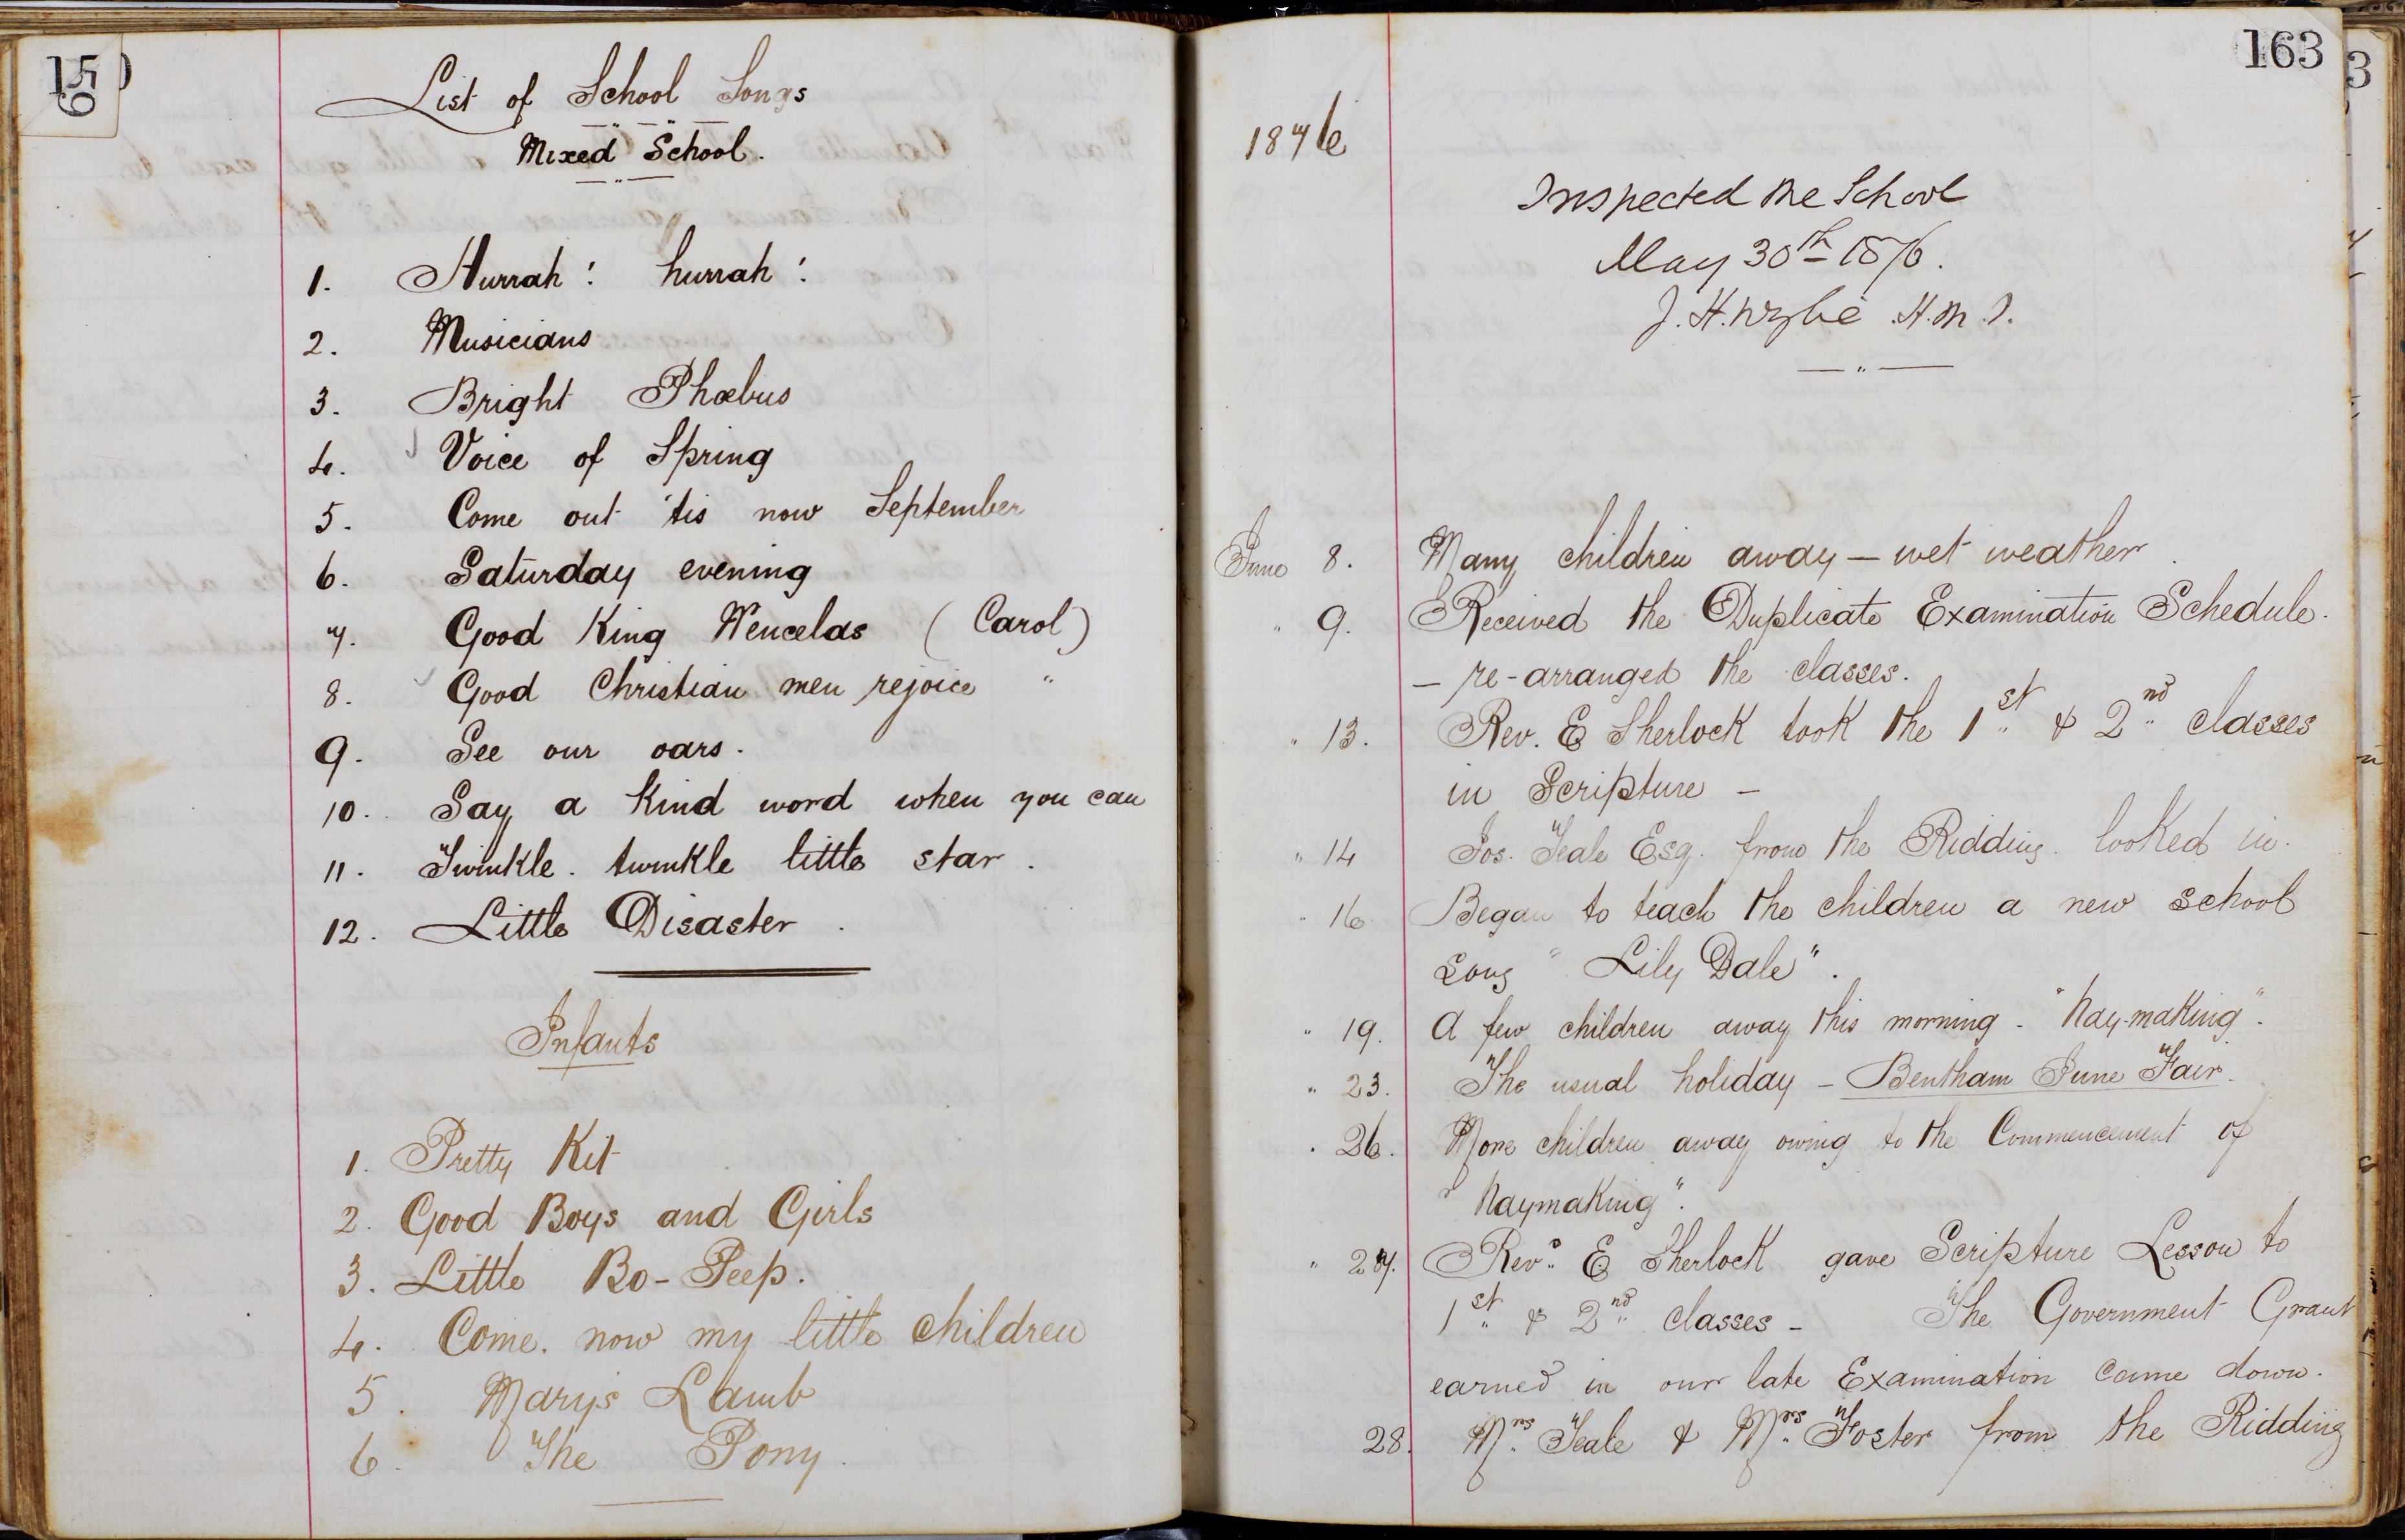 Pages from Bentham Parochial School logbook, showing a list of school songs for September, and mentioning pupil absences due to haymaking.